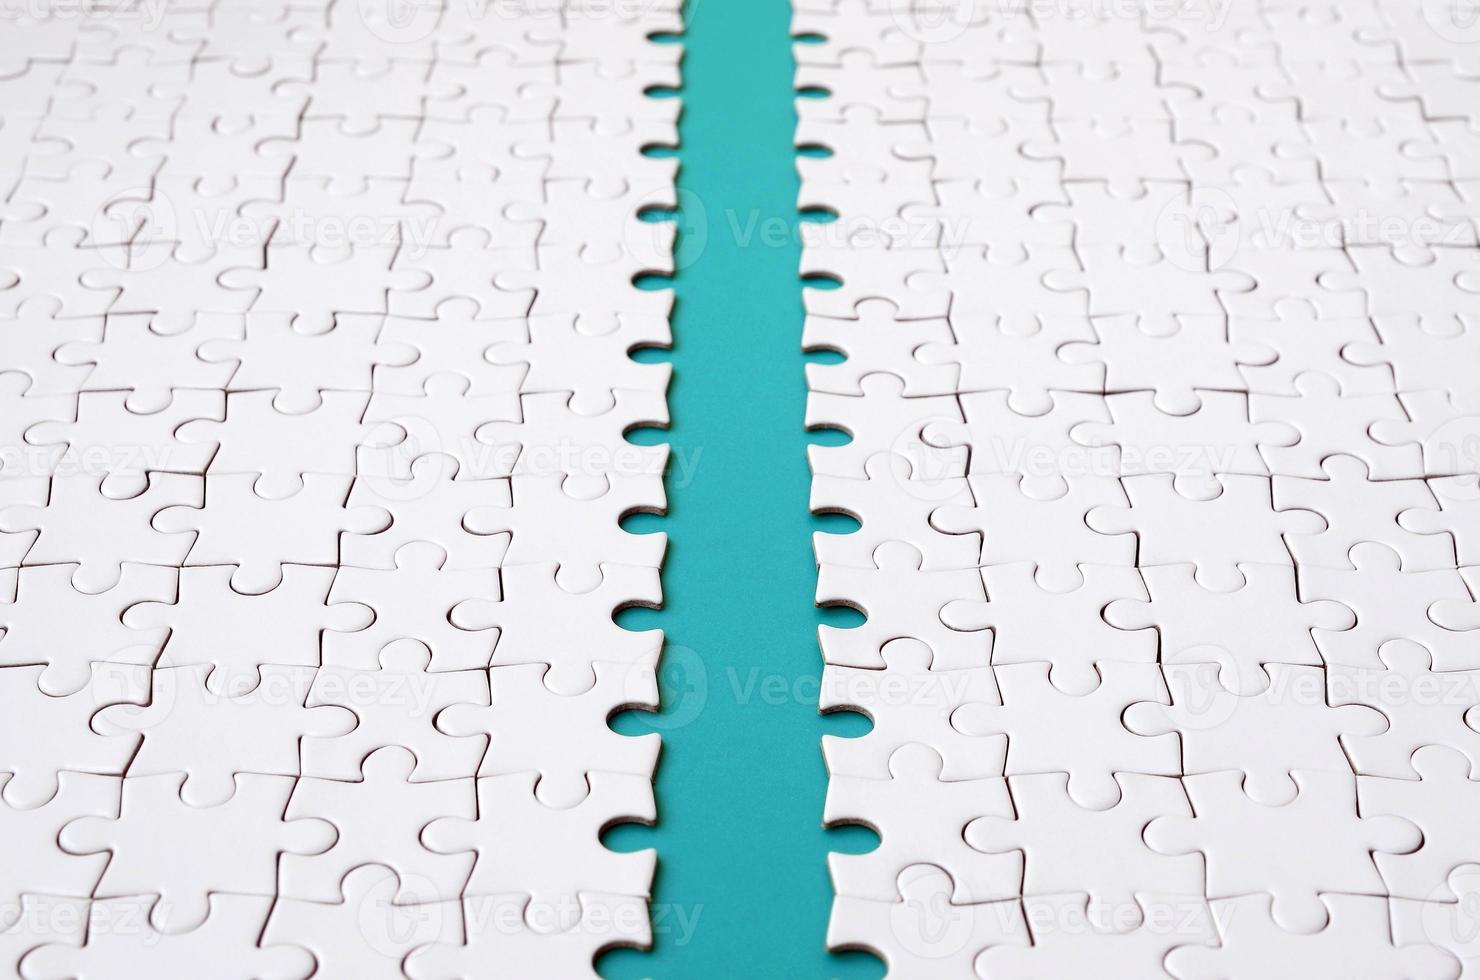 The blue path is laid on the platform of a white folded jigsaw puzzle. Texture image with copy space for text photo